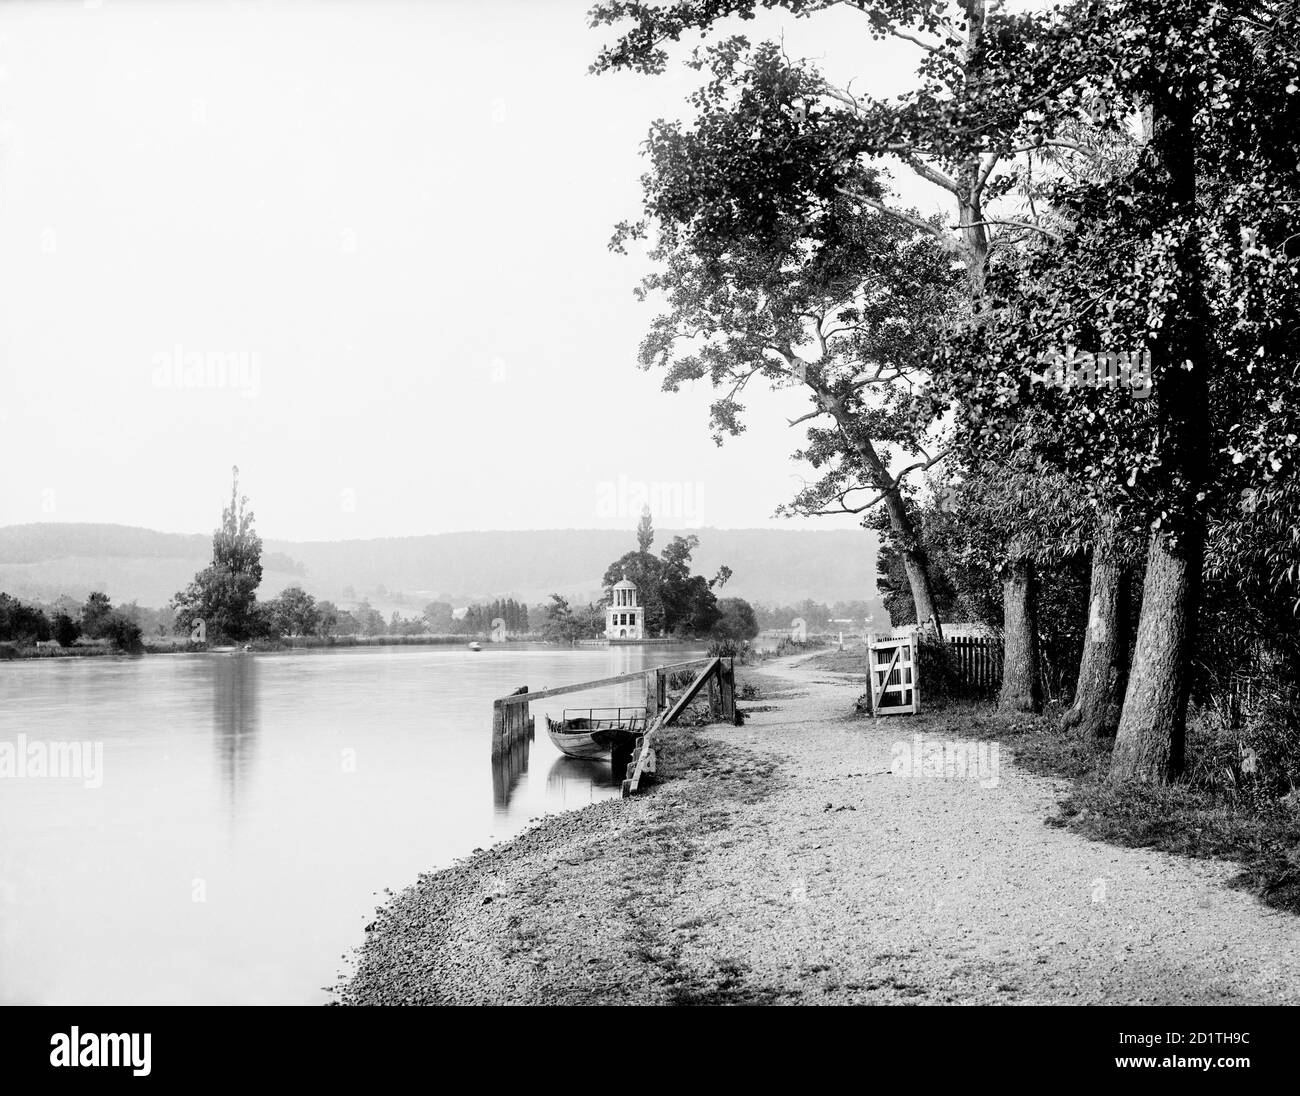 TEMPLE ISLAND, Remenham, Berkshire. A view of the River Thames showing the Regatta course, with the temple on Temple Island in the distance. Built in 1771 to a design by James Wyatt, the temple was originally a fishing lodge for Fawley Court nearby. Photographed in 1878 by Henry Taunt. Stock Photo